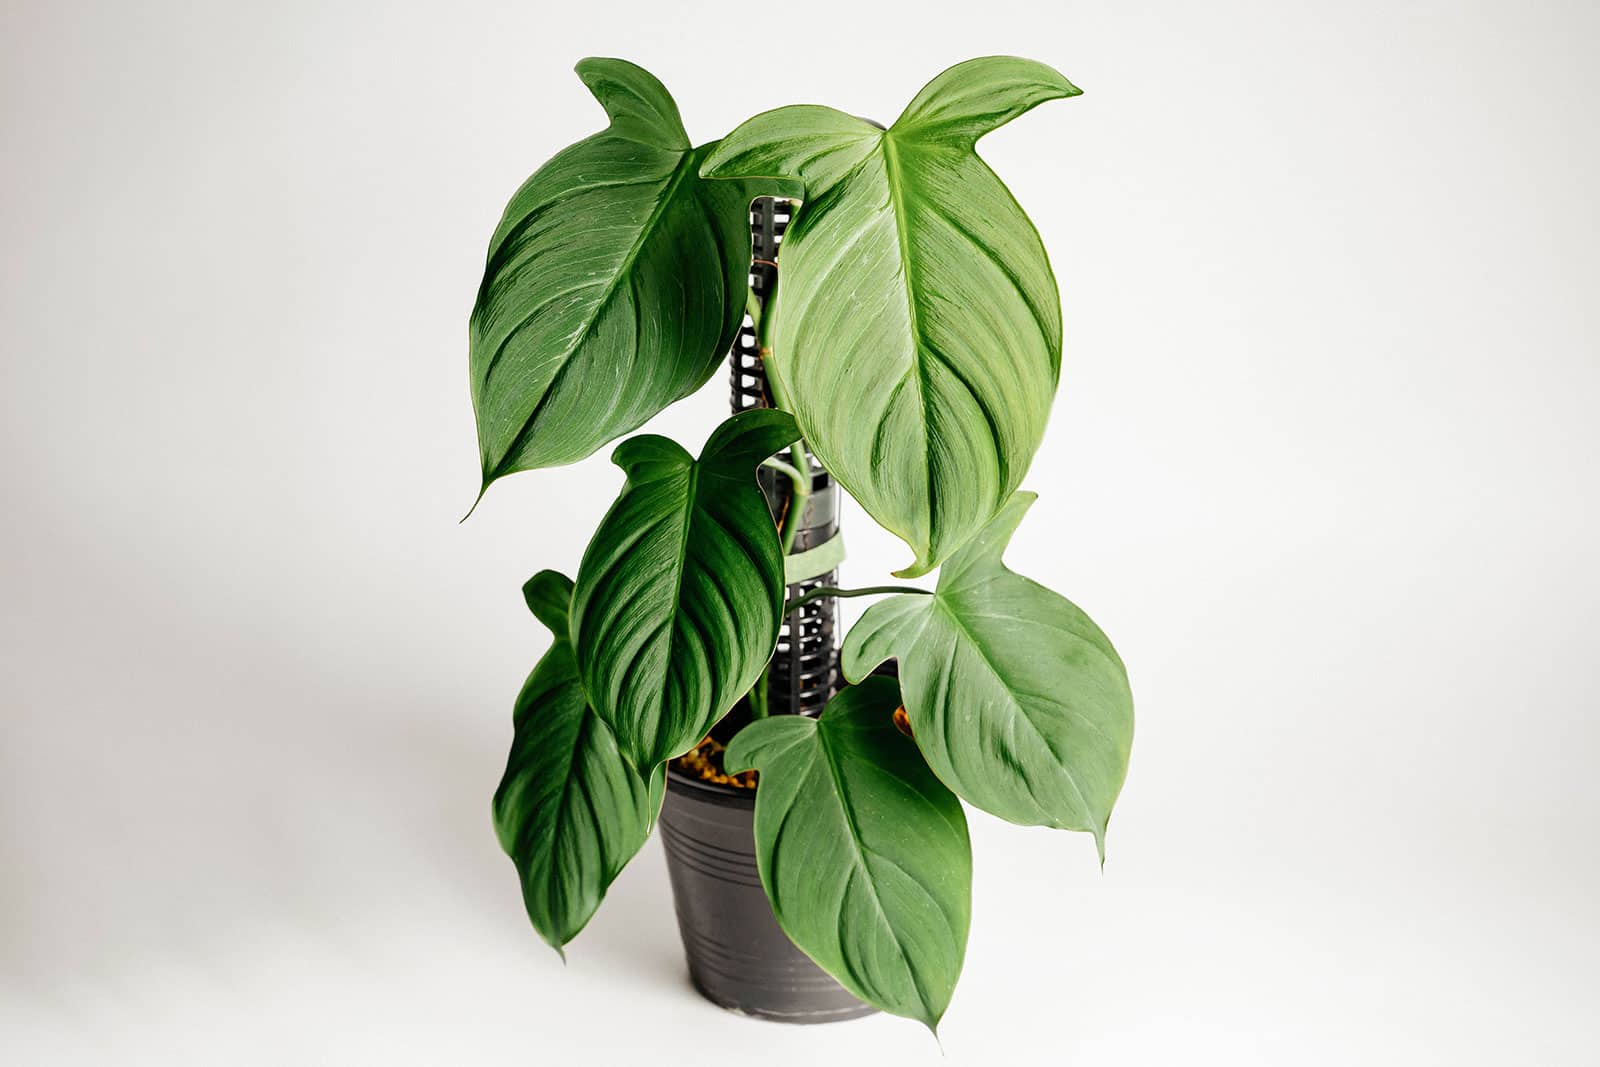 Philodendron camposportoanum houseplant in a black plastic pot, climbing up a black pole, shot against a white background